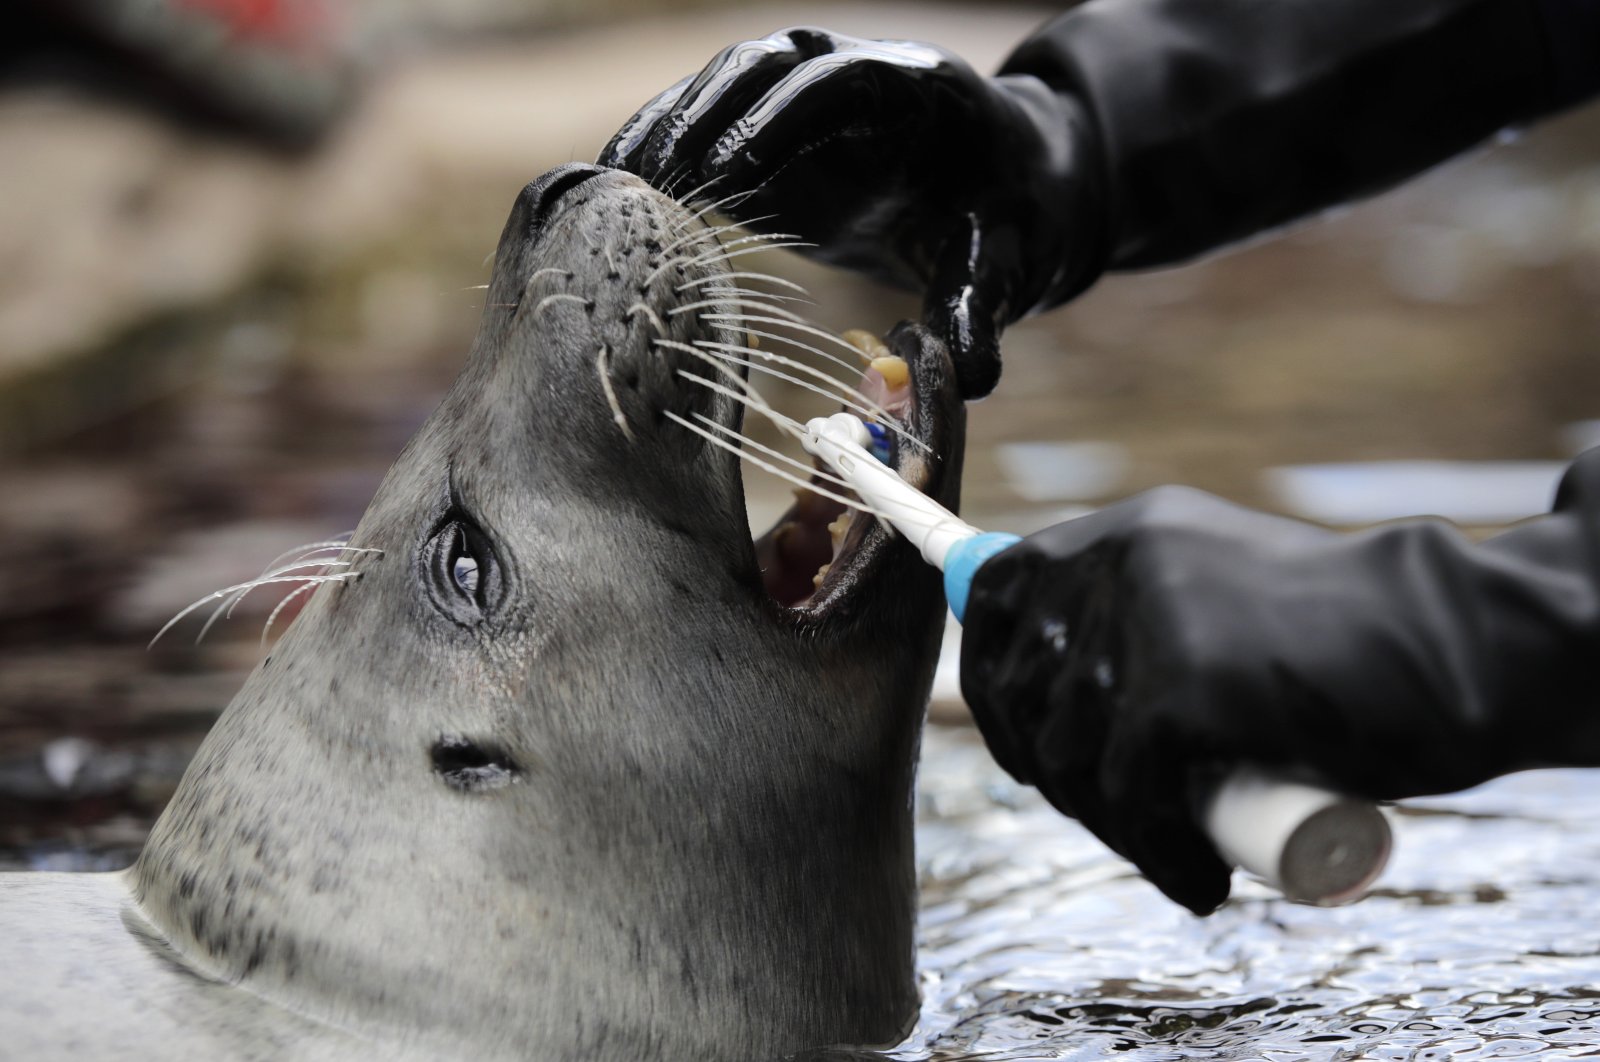 In this Friday April 10, 2020 photo, Amelia, a harbor seal opens her mouth as mammal trainer Terra Wilson brushes her teeth at an outdoor exhibit at the New England Aquarium in Boston. (AP Photo)